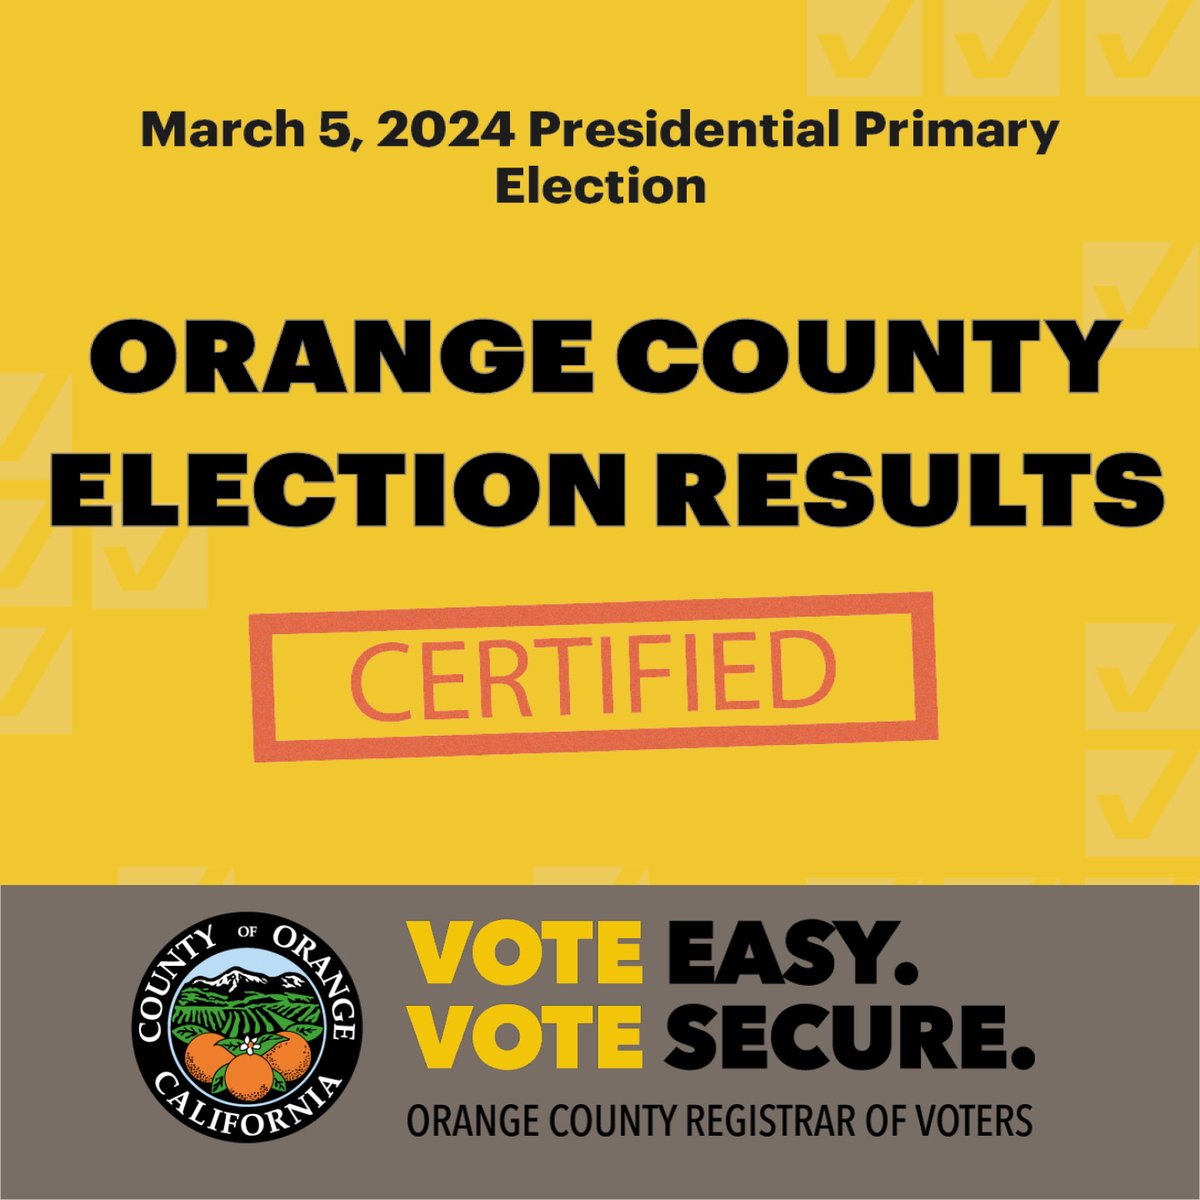 Registrar of Voters Bob Page on Friday, March 22 certified the official Orange County results of the March 5, 2024 Presidential Primary Election. Total voter turnout for the election was 37.7 percent. The results are available on our website at ocvote.gov/results.